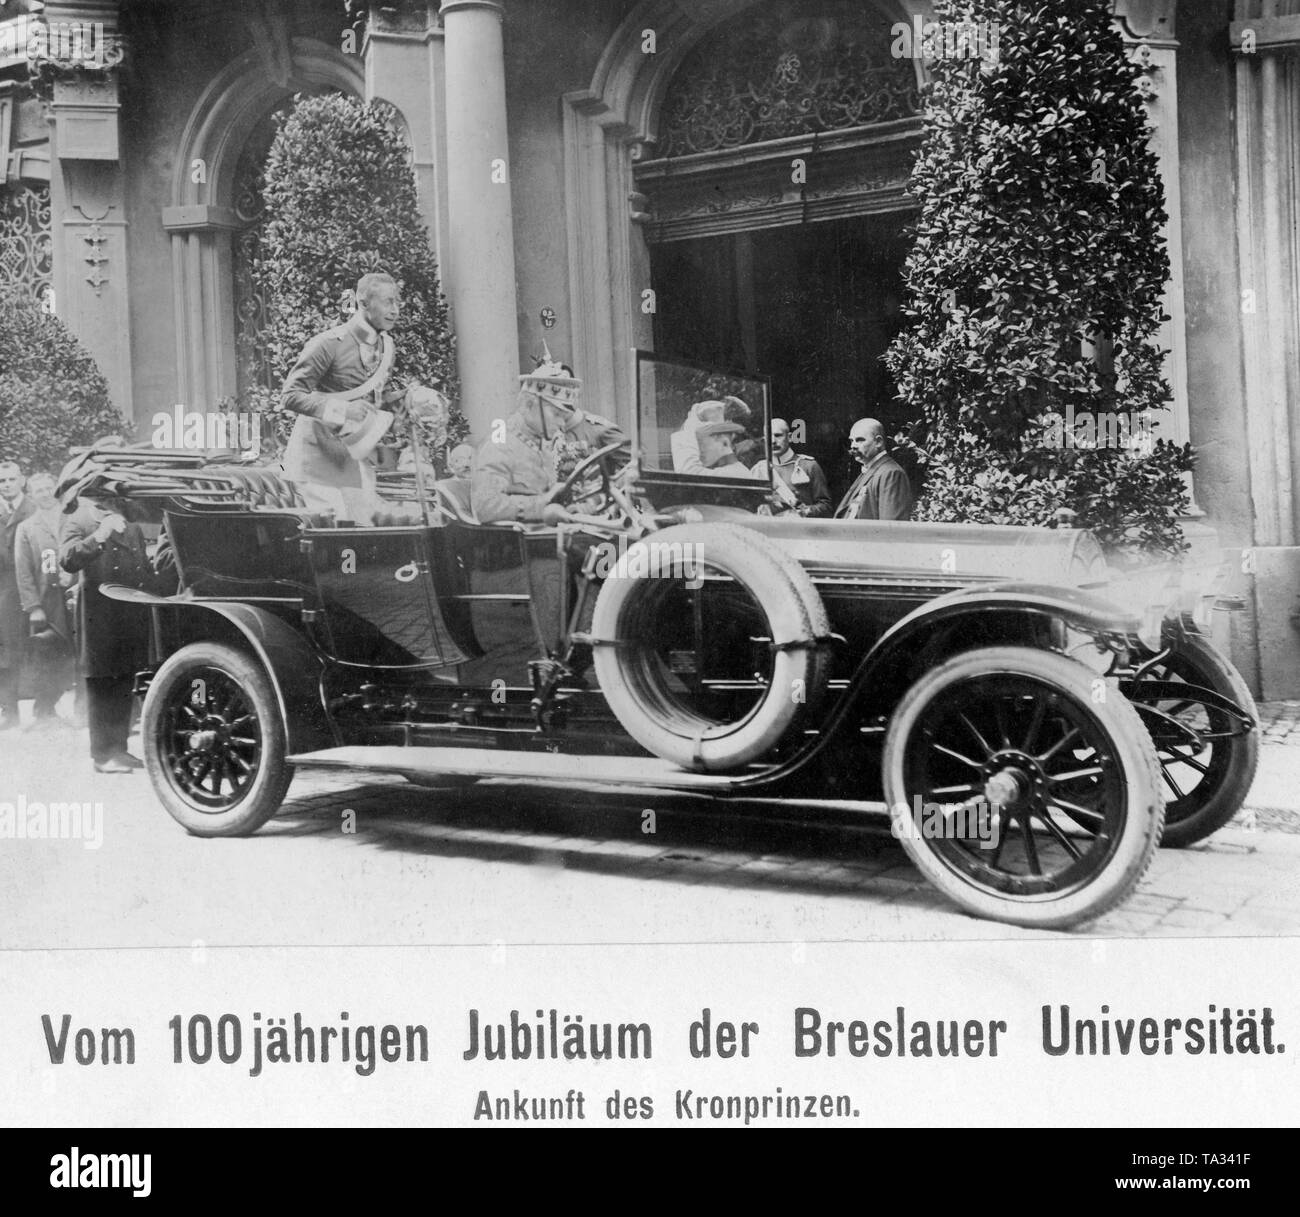 Crown Prince Wilhelm visits the University of Wroclaw on the occasion of its 100th anniversary, Here the Crown Prince (backseat, standing) is driving in front of the entrance to the university. Stock Photo